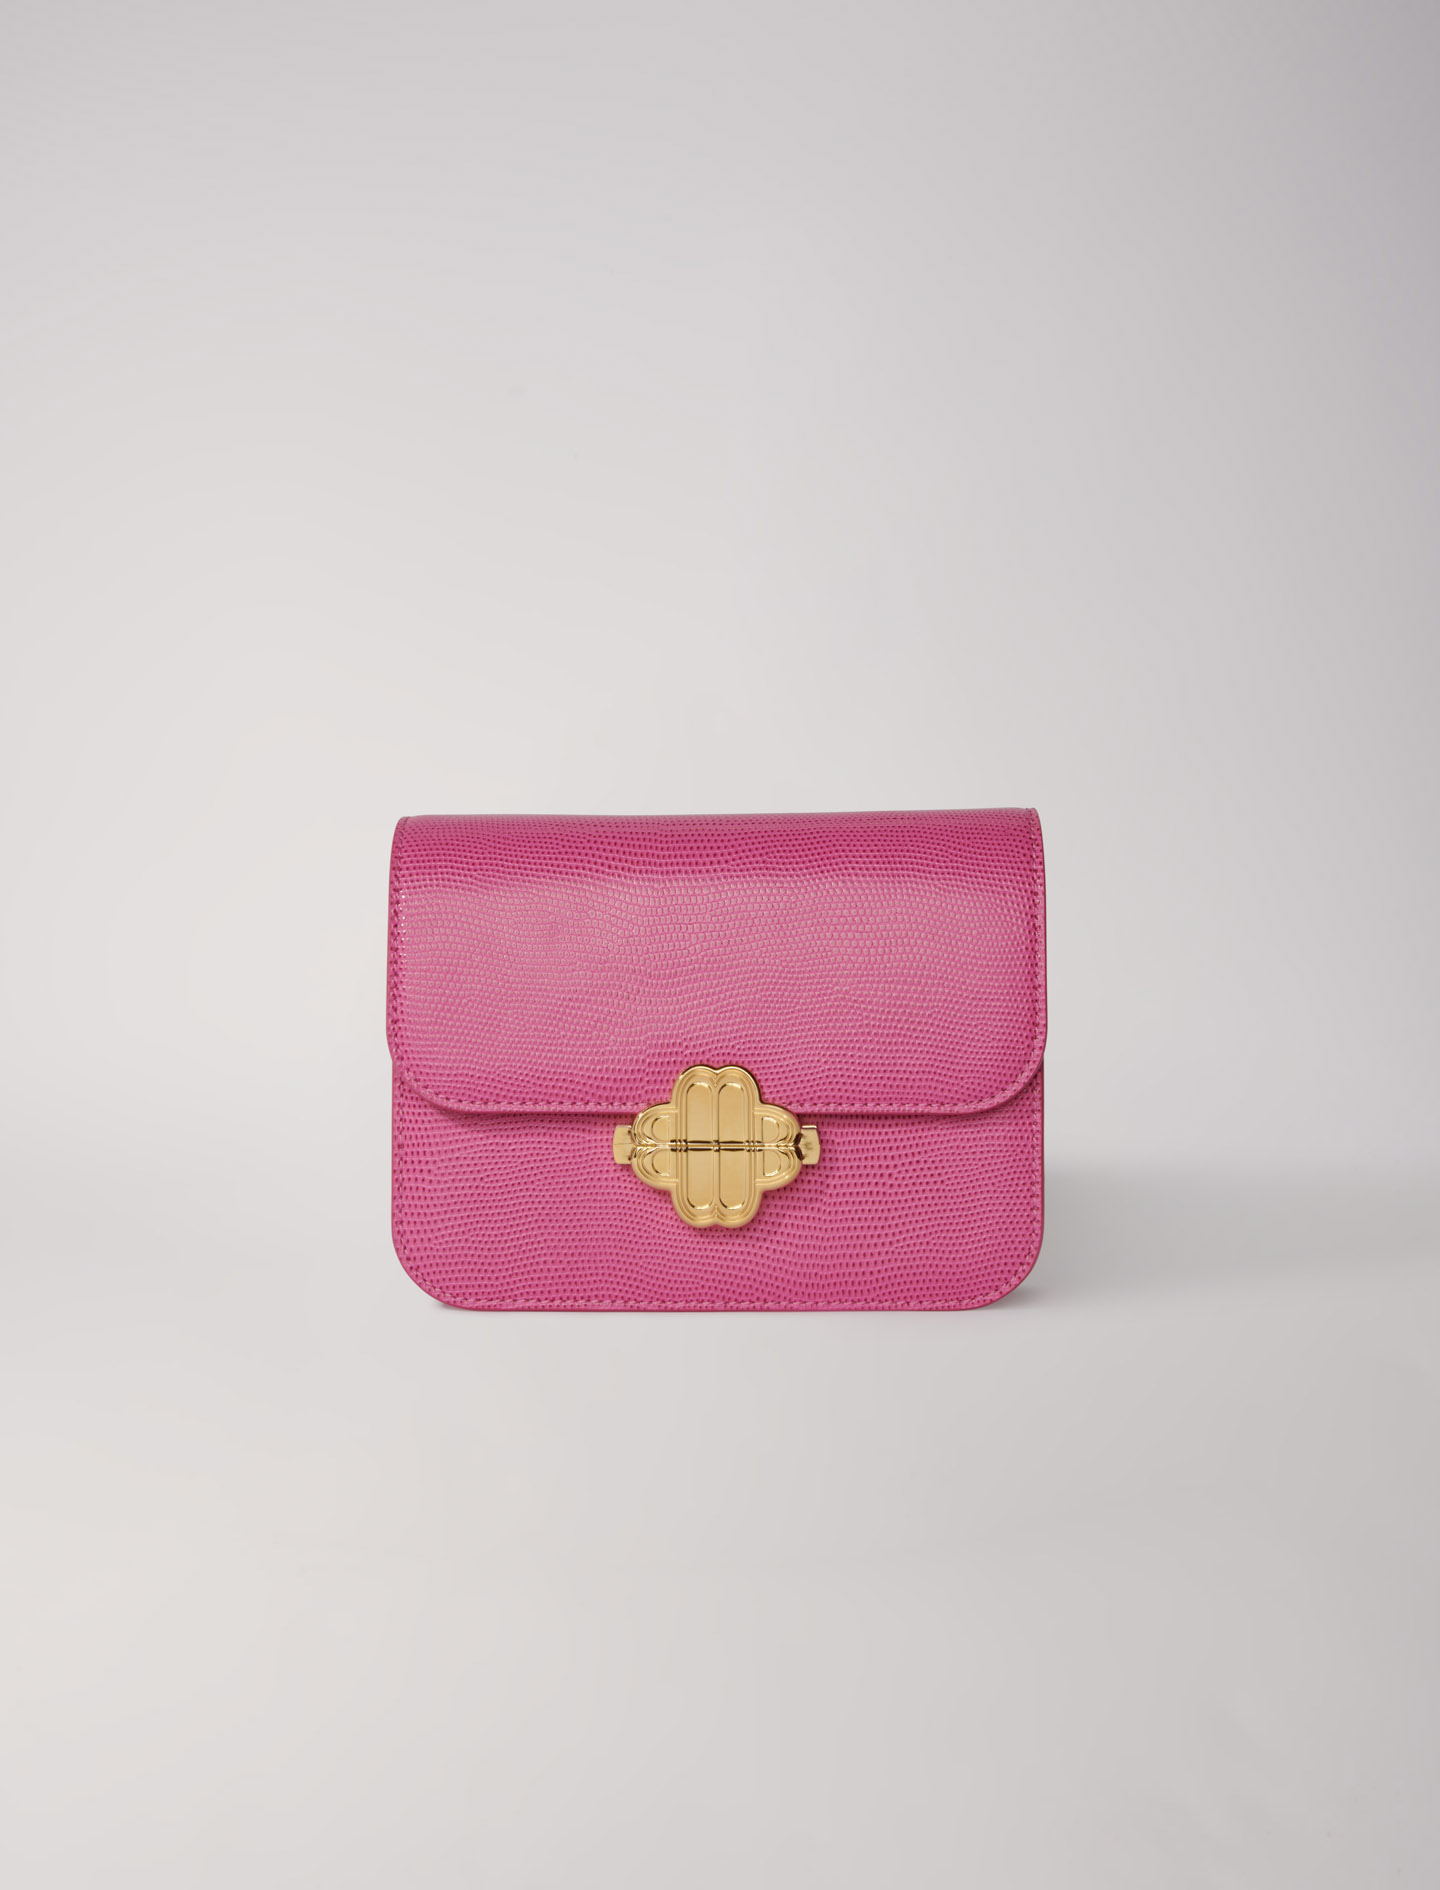 Maje Woman's cotton Coating: Lizard-effect embossed leather bag for Fall/Winter, in color Fuchsia / Red